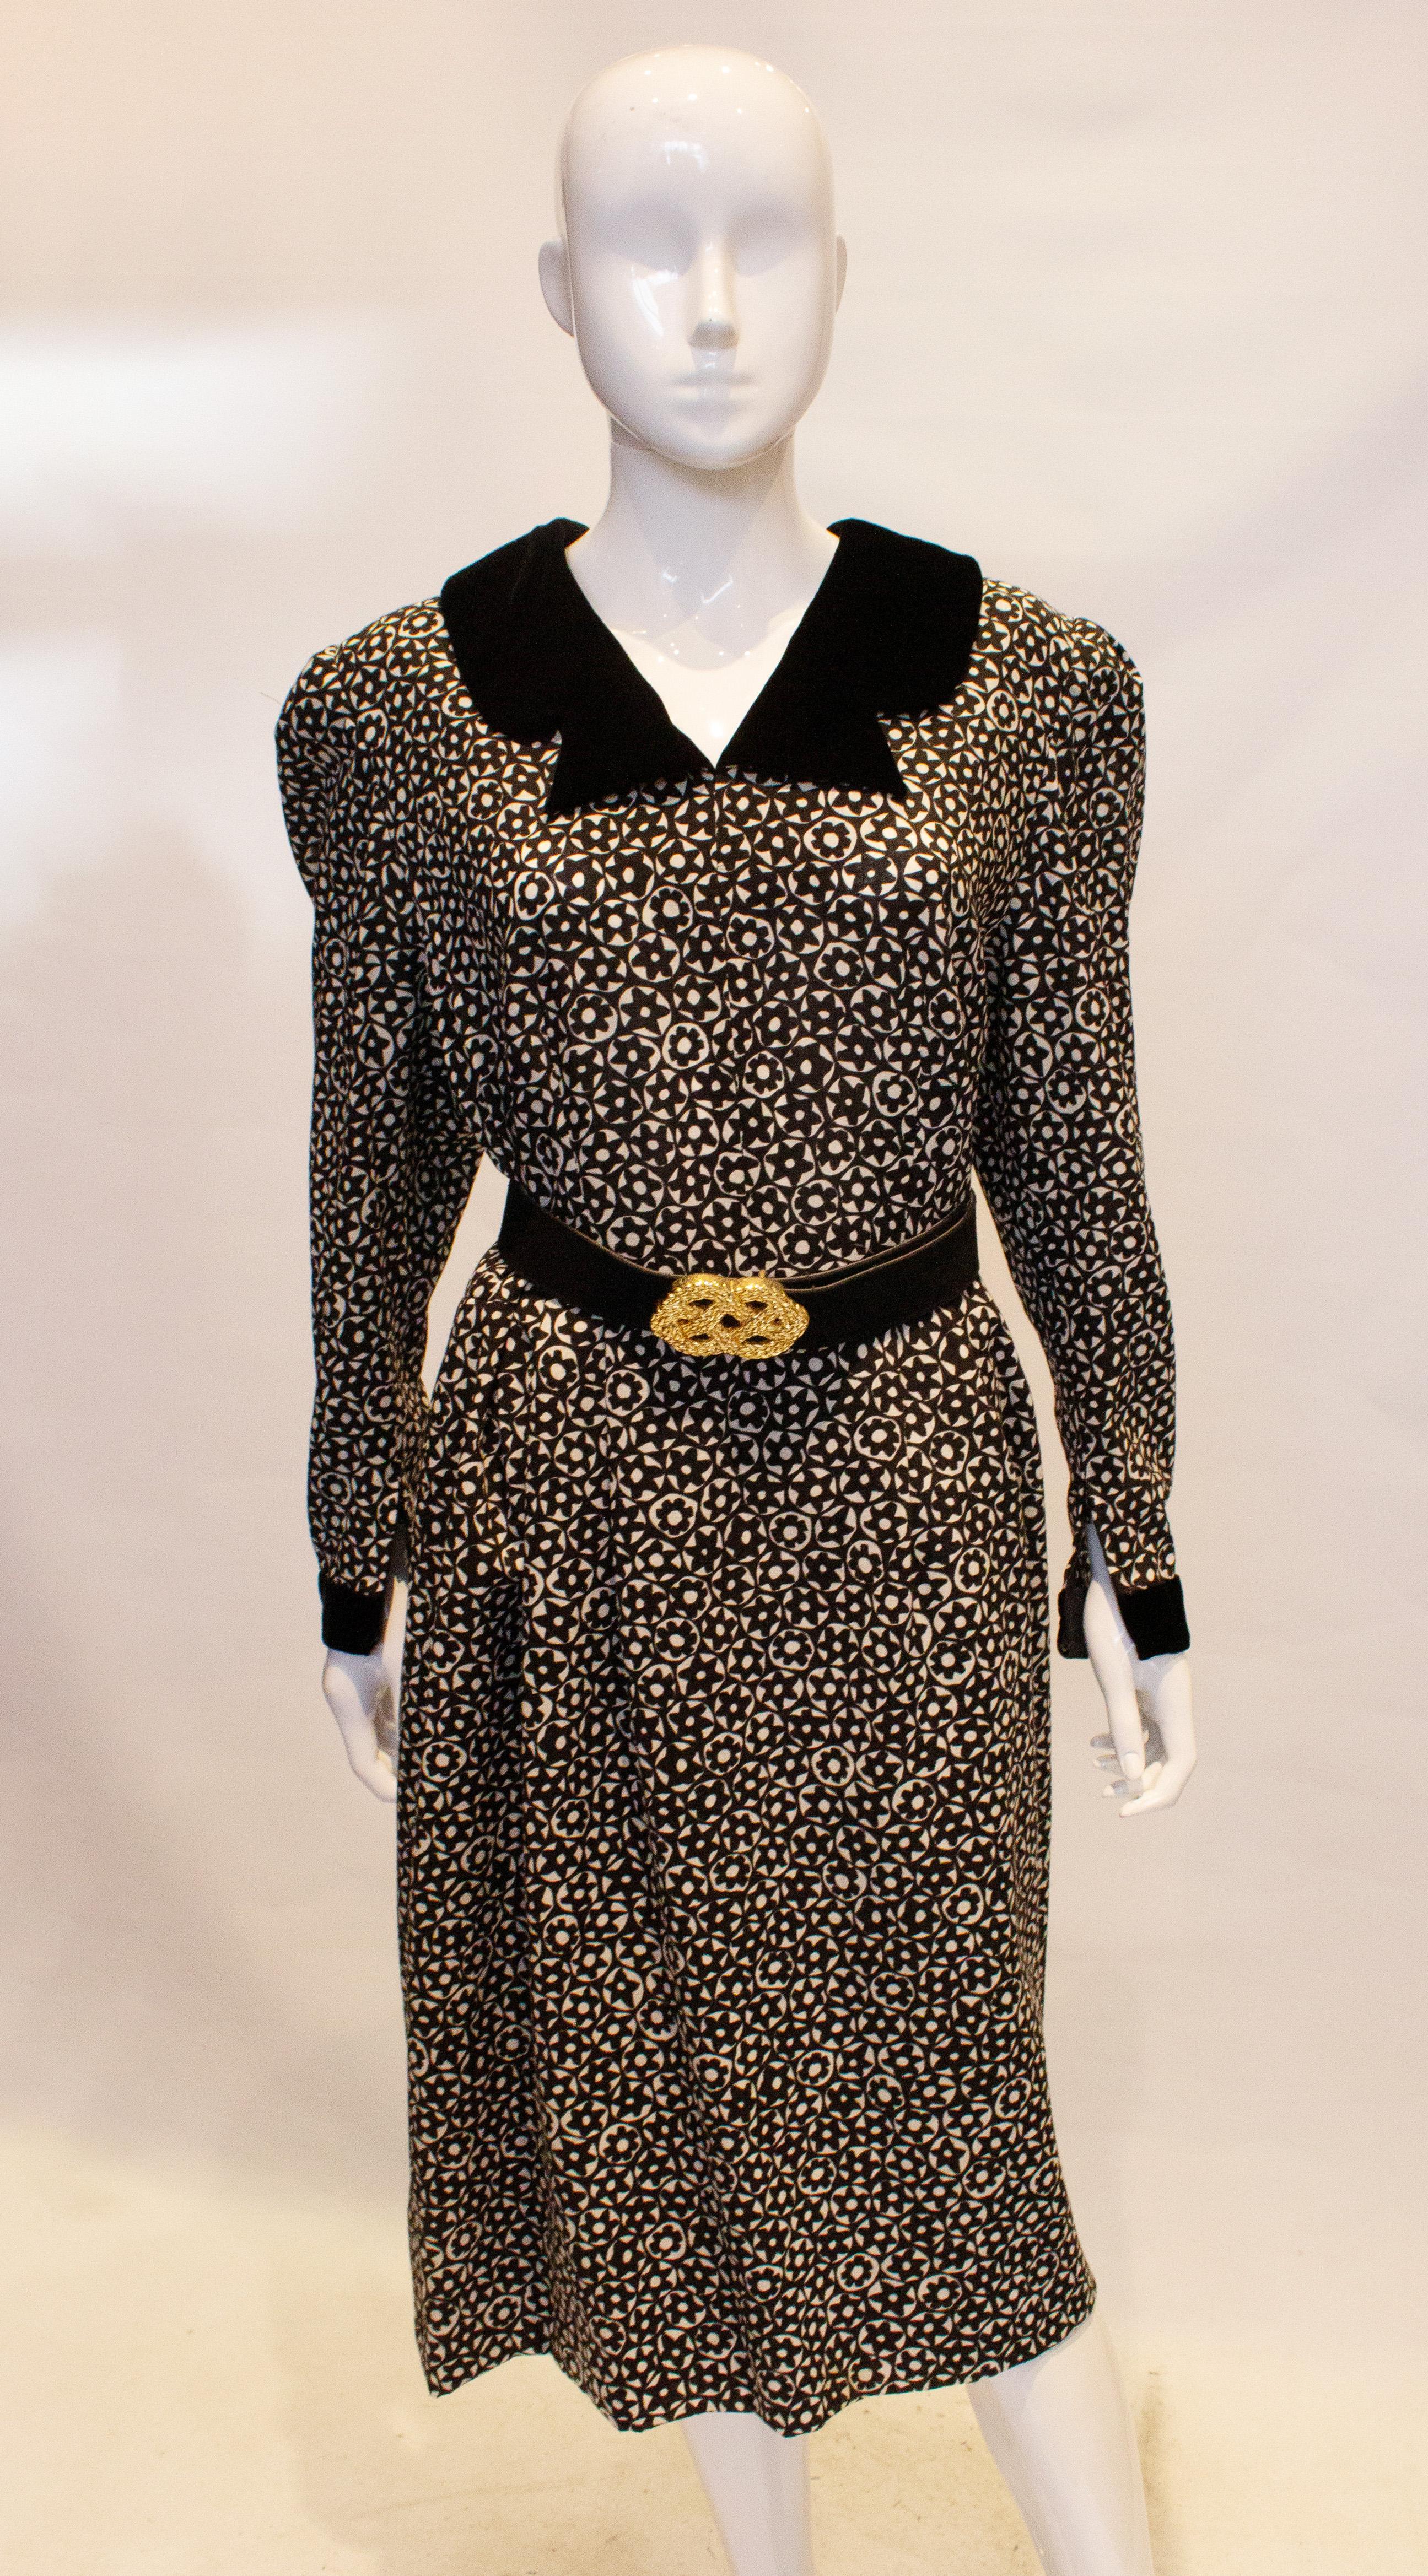 Vintage Donald Campbell Black and White Dress For Sale 2